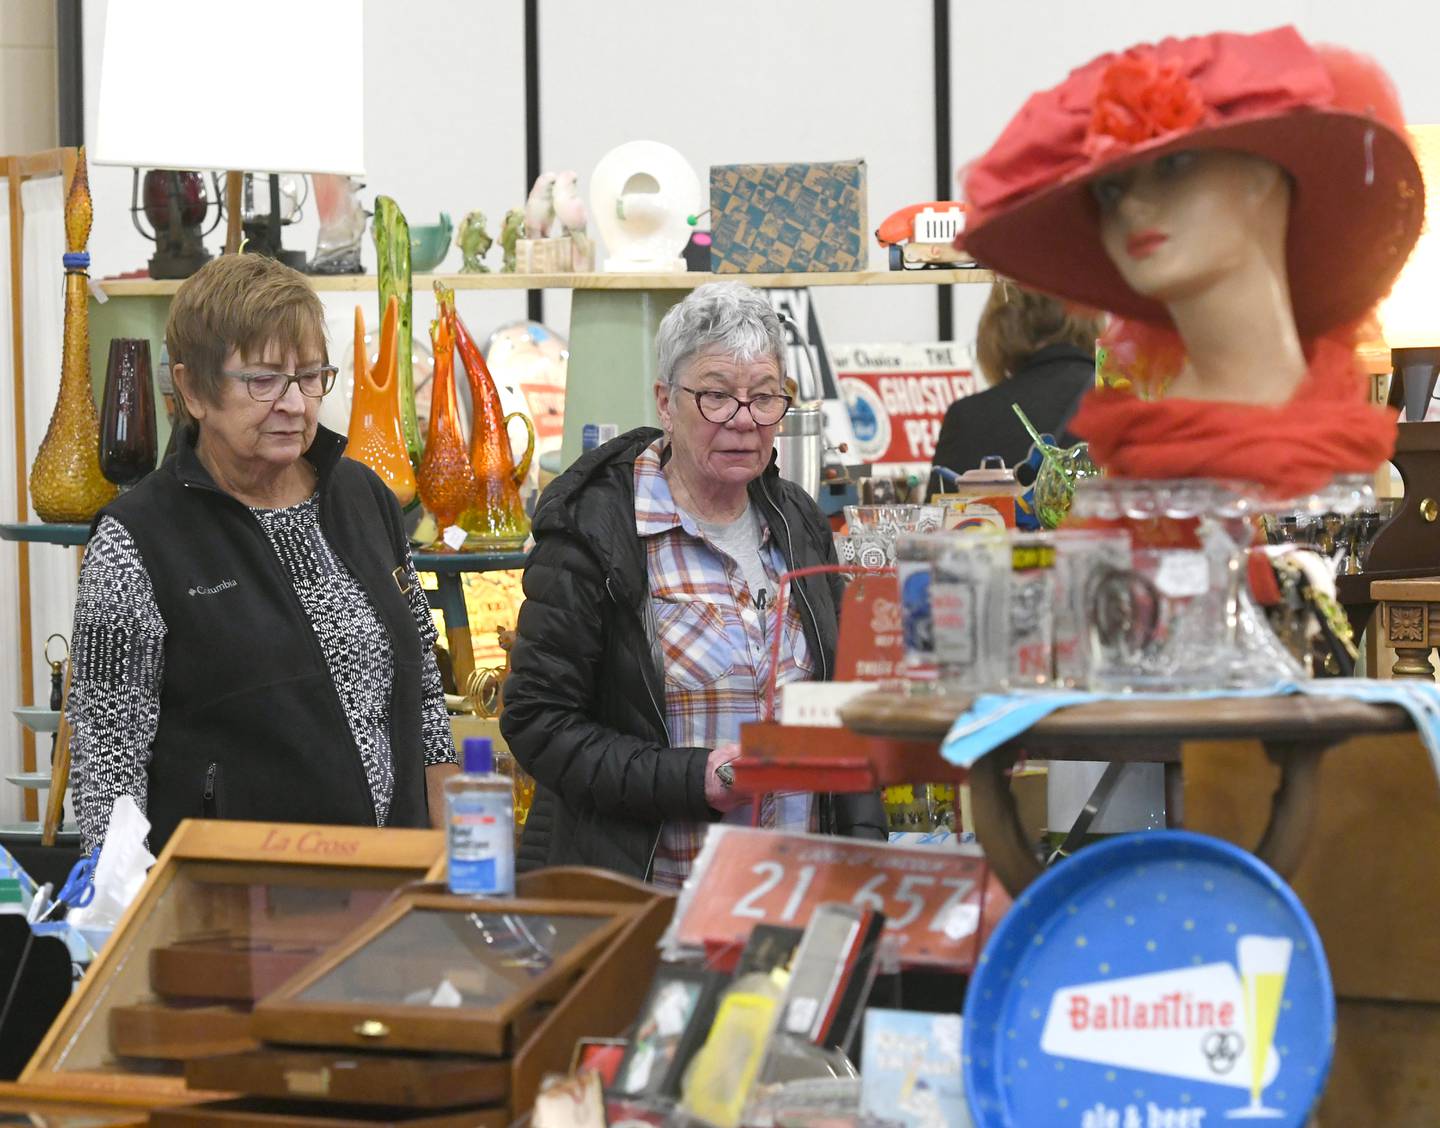 Linda Dunphy of Dixon (left) and Susie Lendman of Sterling look at antiques in Tammy Mendoza's booth at the Oregon Woman's Club Antique Show on Saturday in Oregon. Mendoza's antique shop 'The Cottage' is located in Coal Valley. She was one of 44 dealers at this year's event.